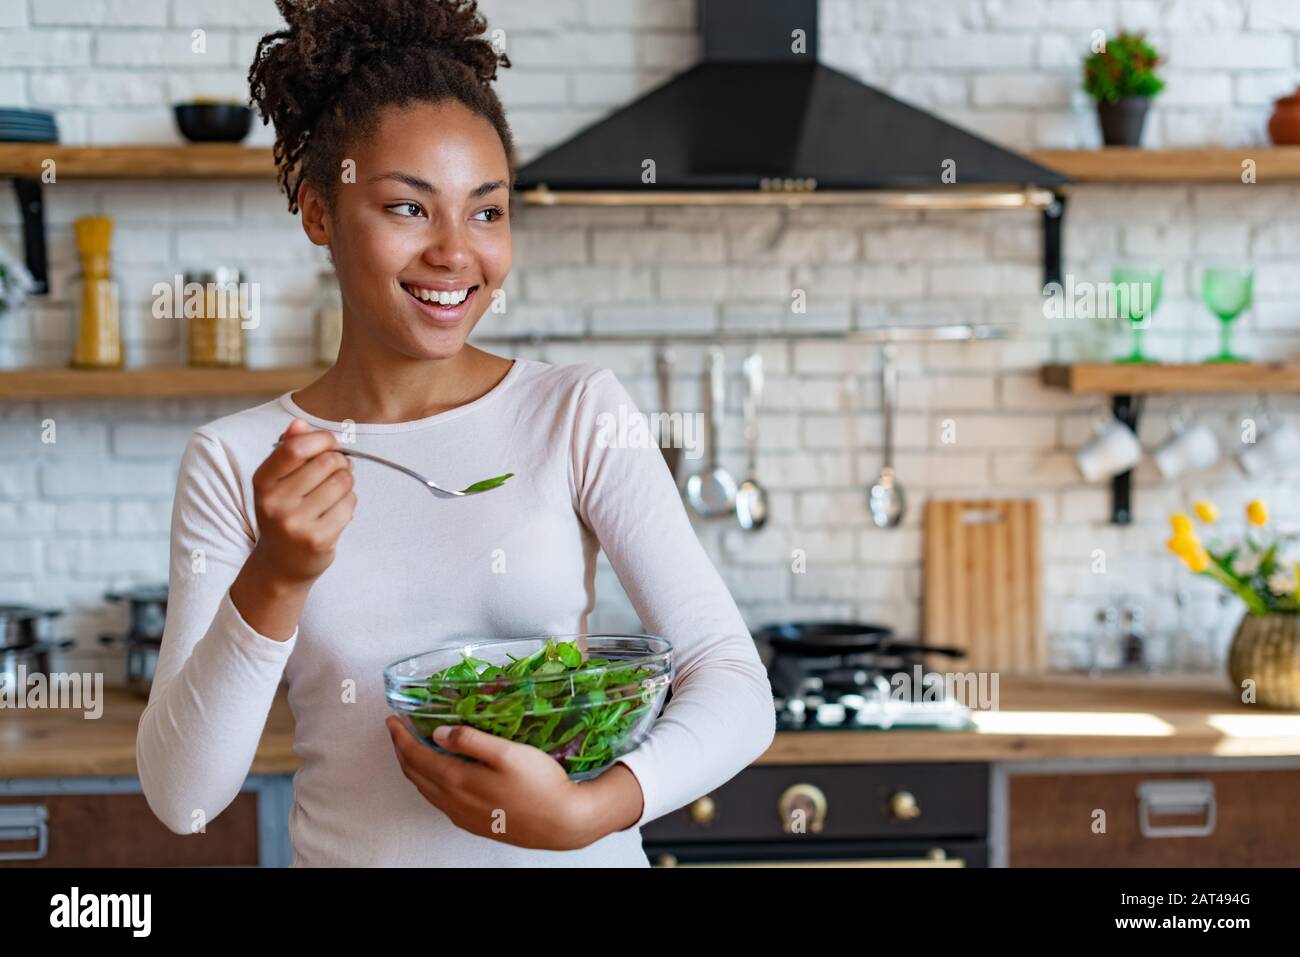 Pretty mulatto household cooking at home a healthy food, tasty a salad - Image Stock Photo